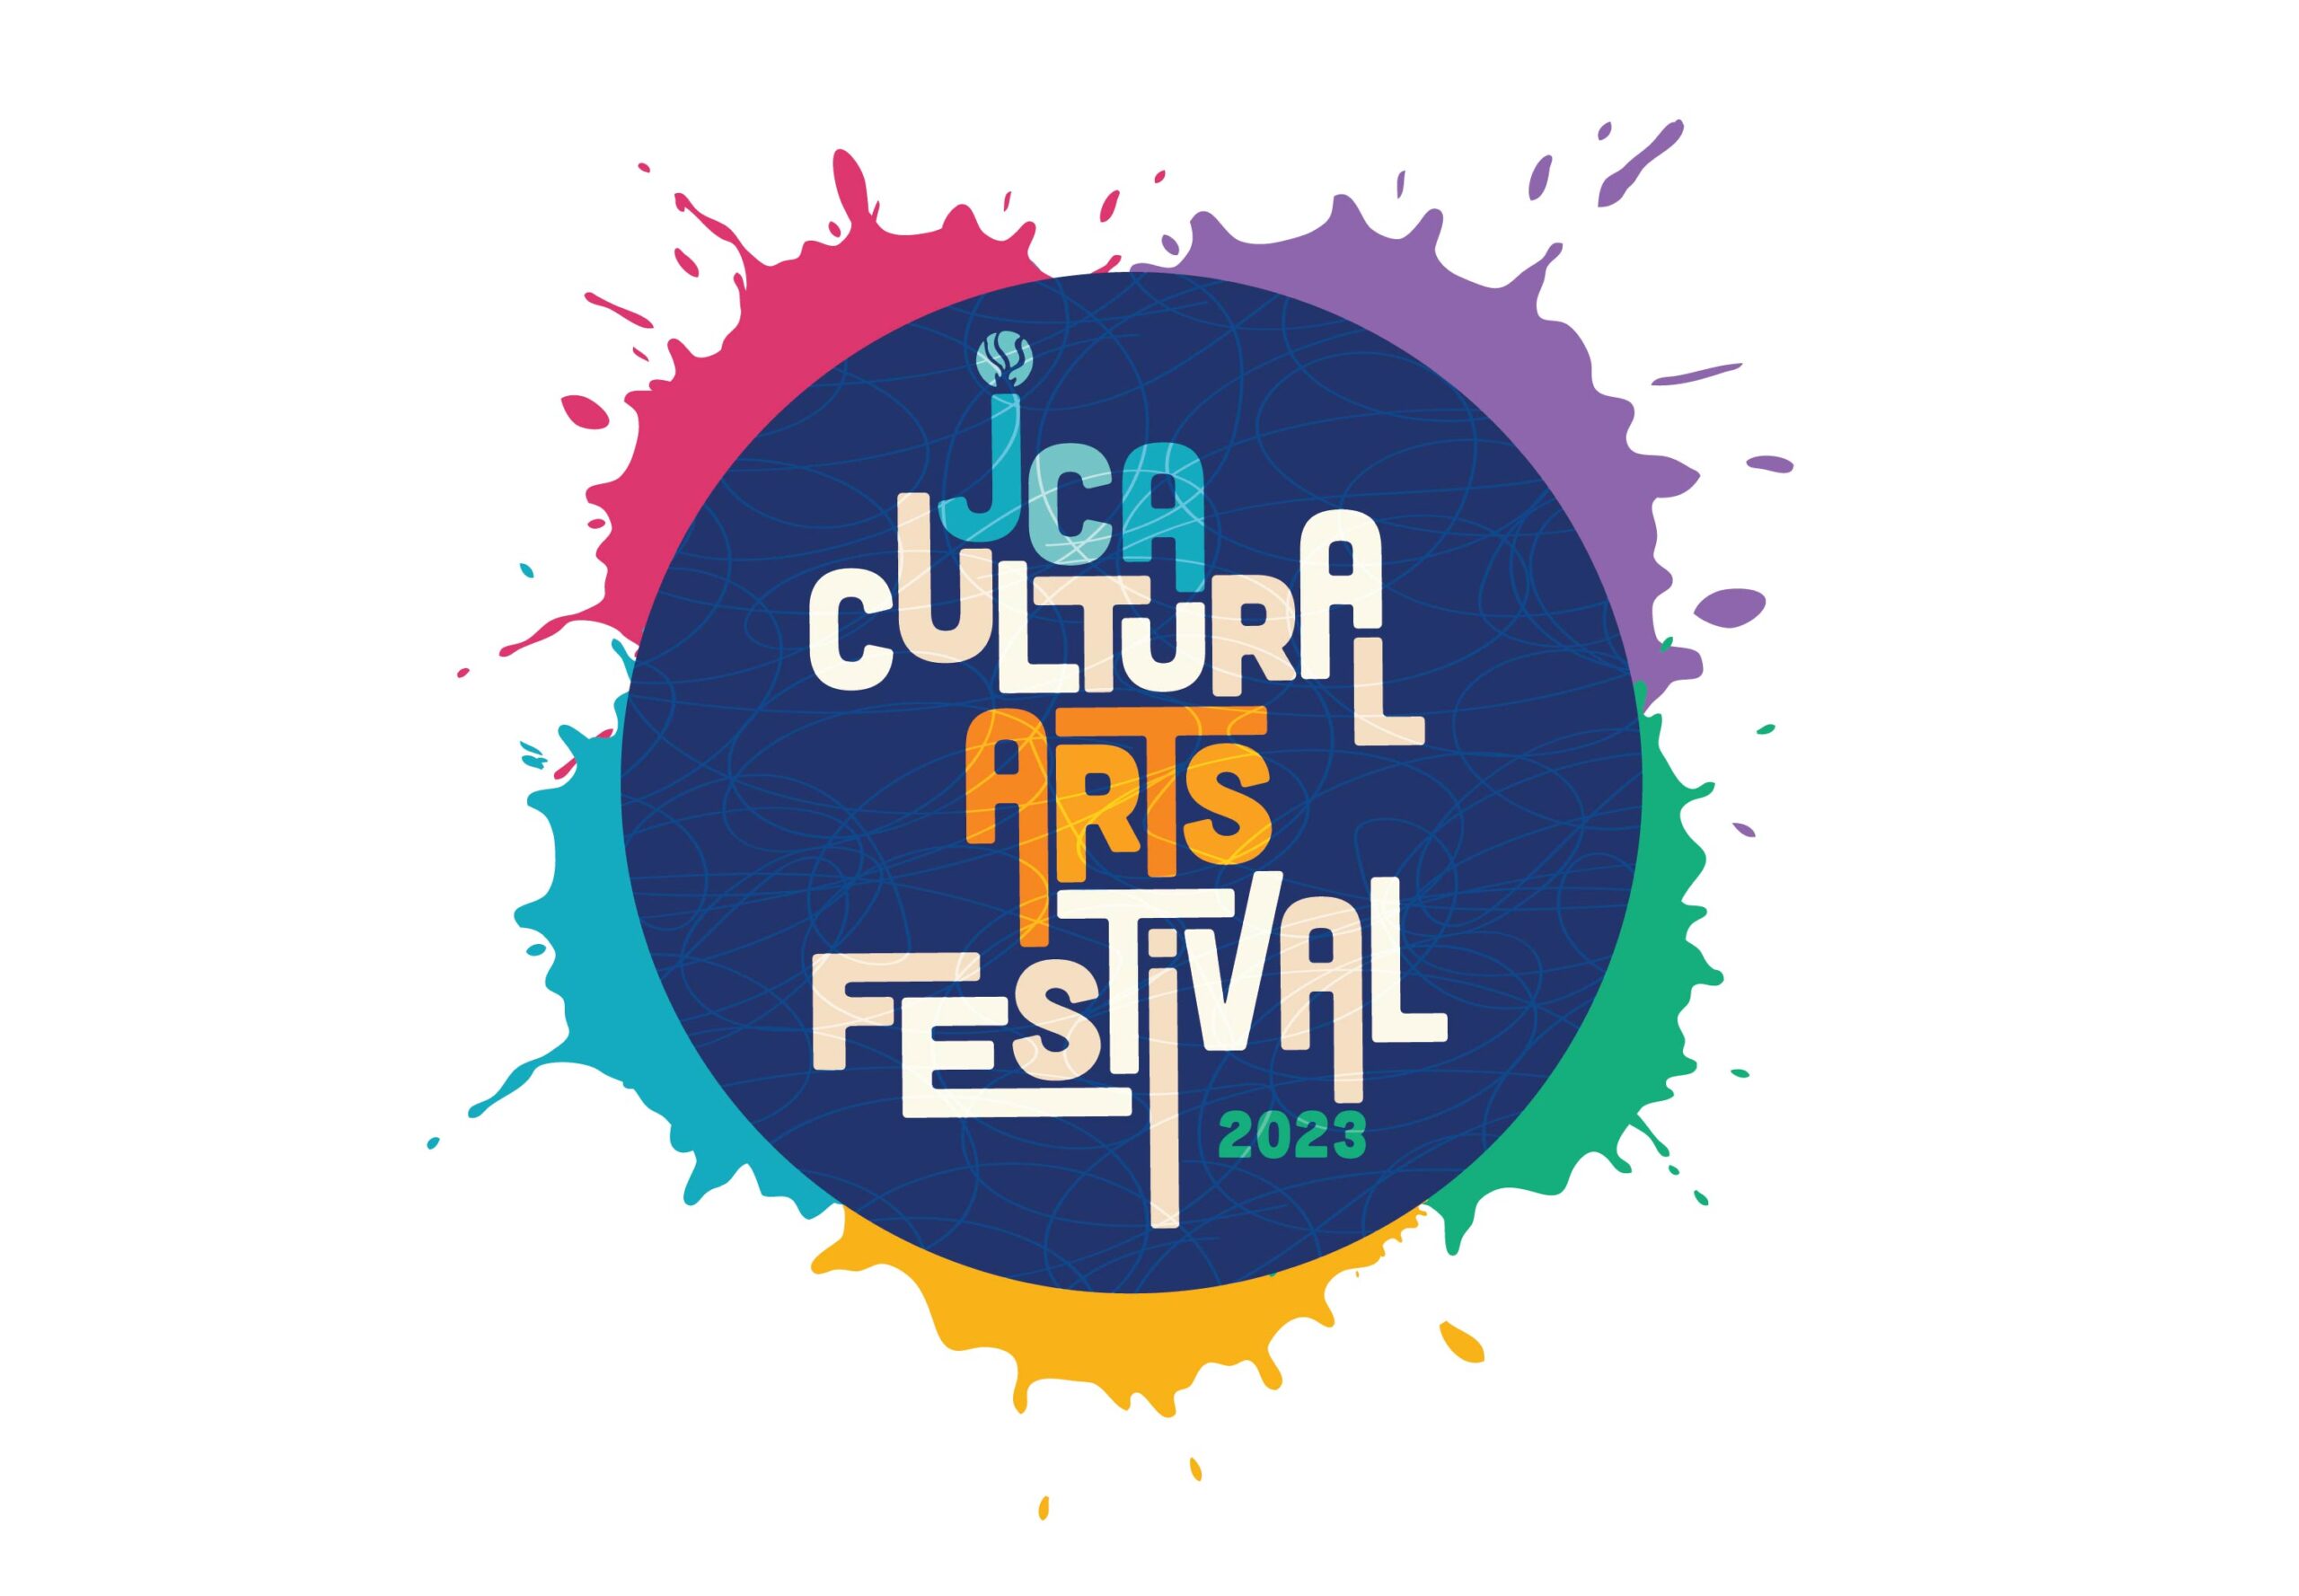 The logo for the cultural arts festival.